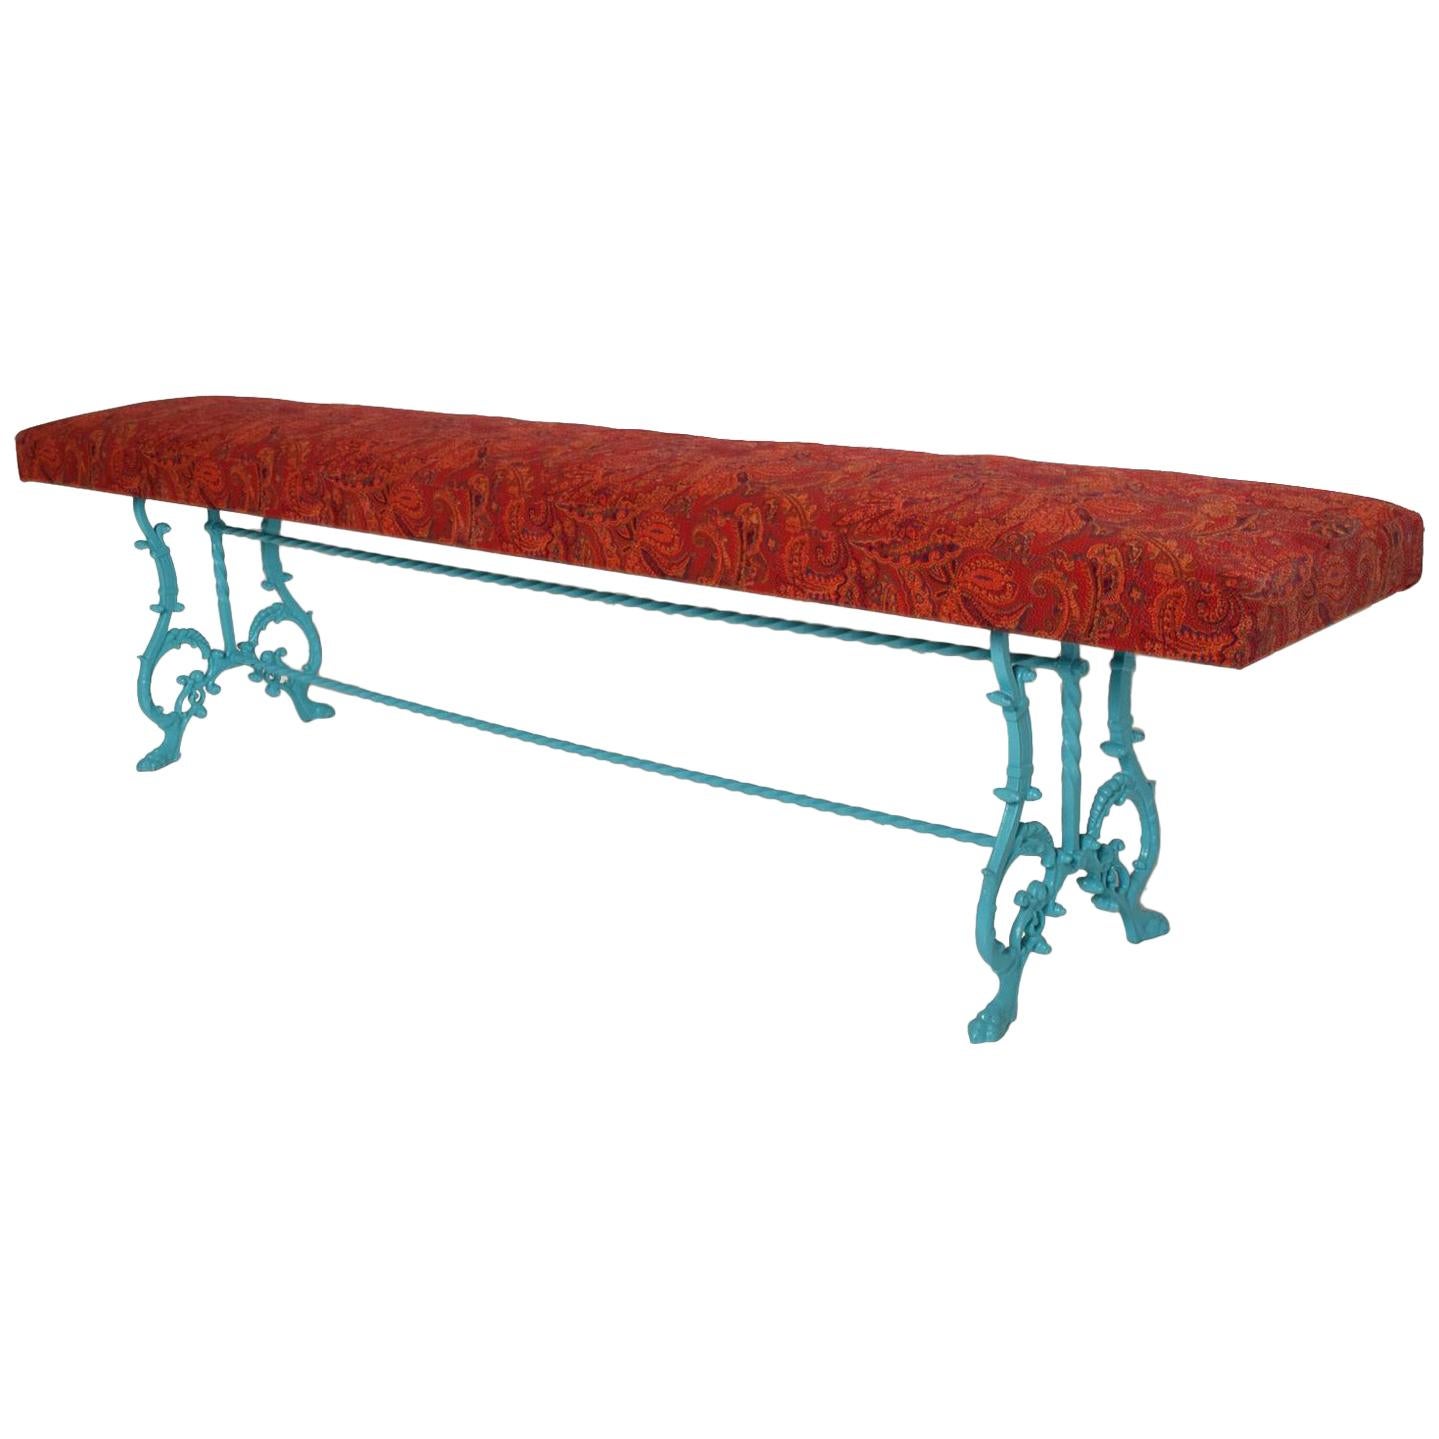 
Hollywood Regency Wrought Iron Bench New Upholstery.
Made in the USA circa the 1970s.
New upholstery in dominant red color with decorative pattern.
The wrought iron base has been painted in a light blue.
Dimensions: 72